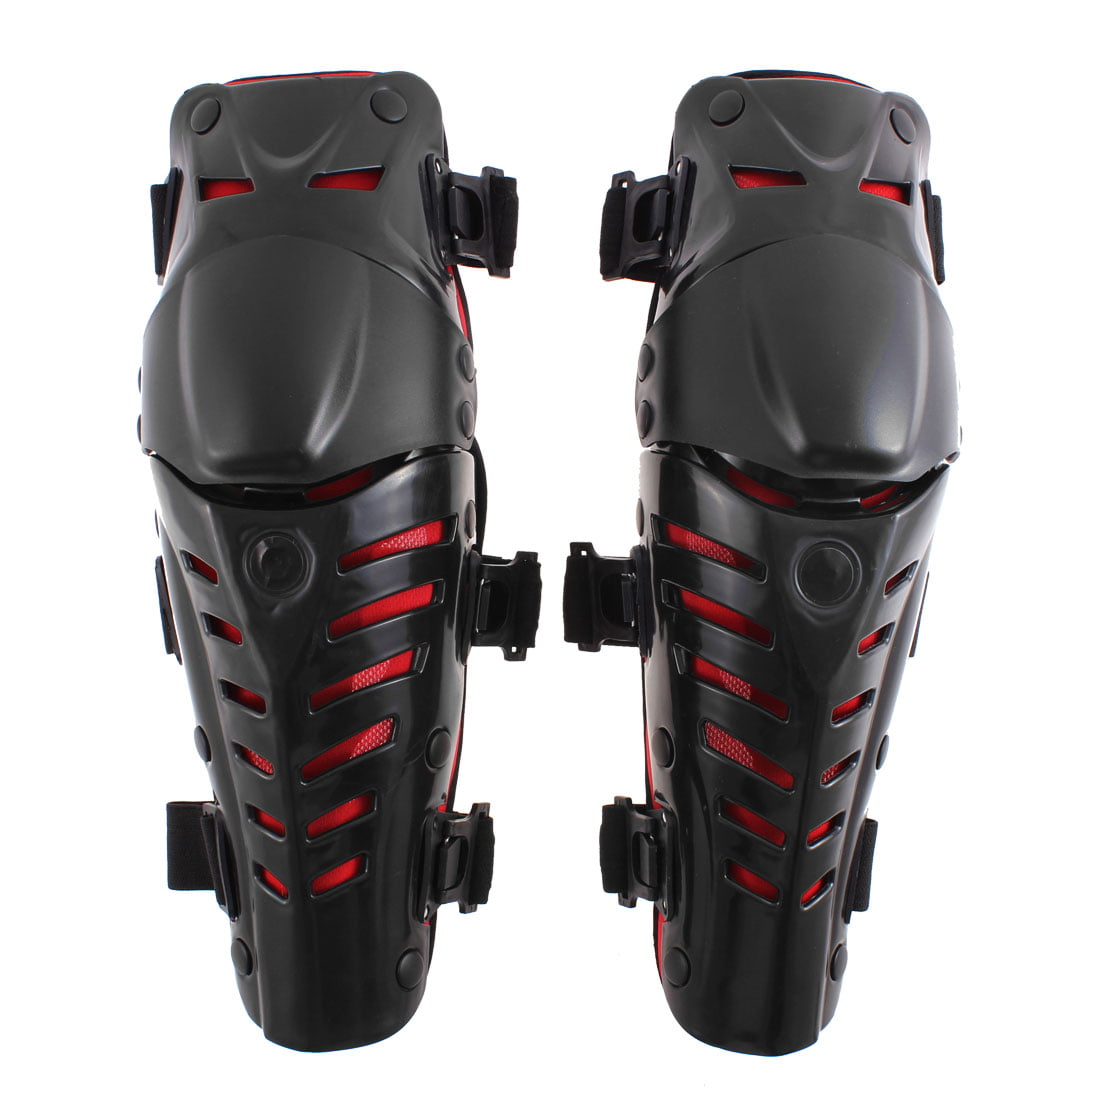 2PCS Adult Elbow Knee Shin Armor Guard Pad Outdoor Protector for Bike US S2 